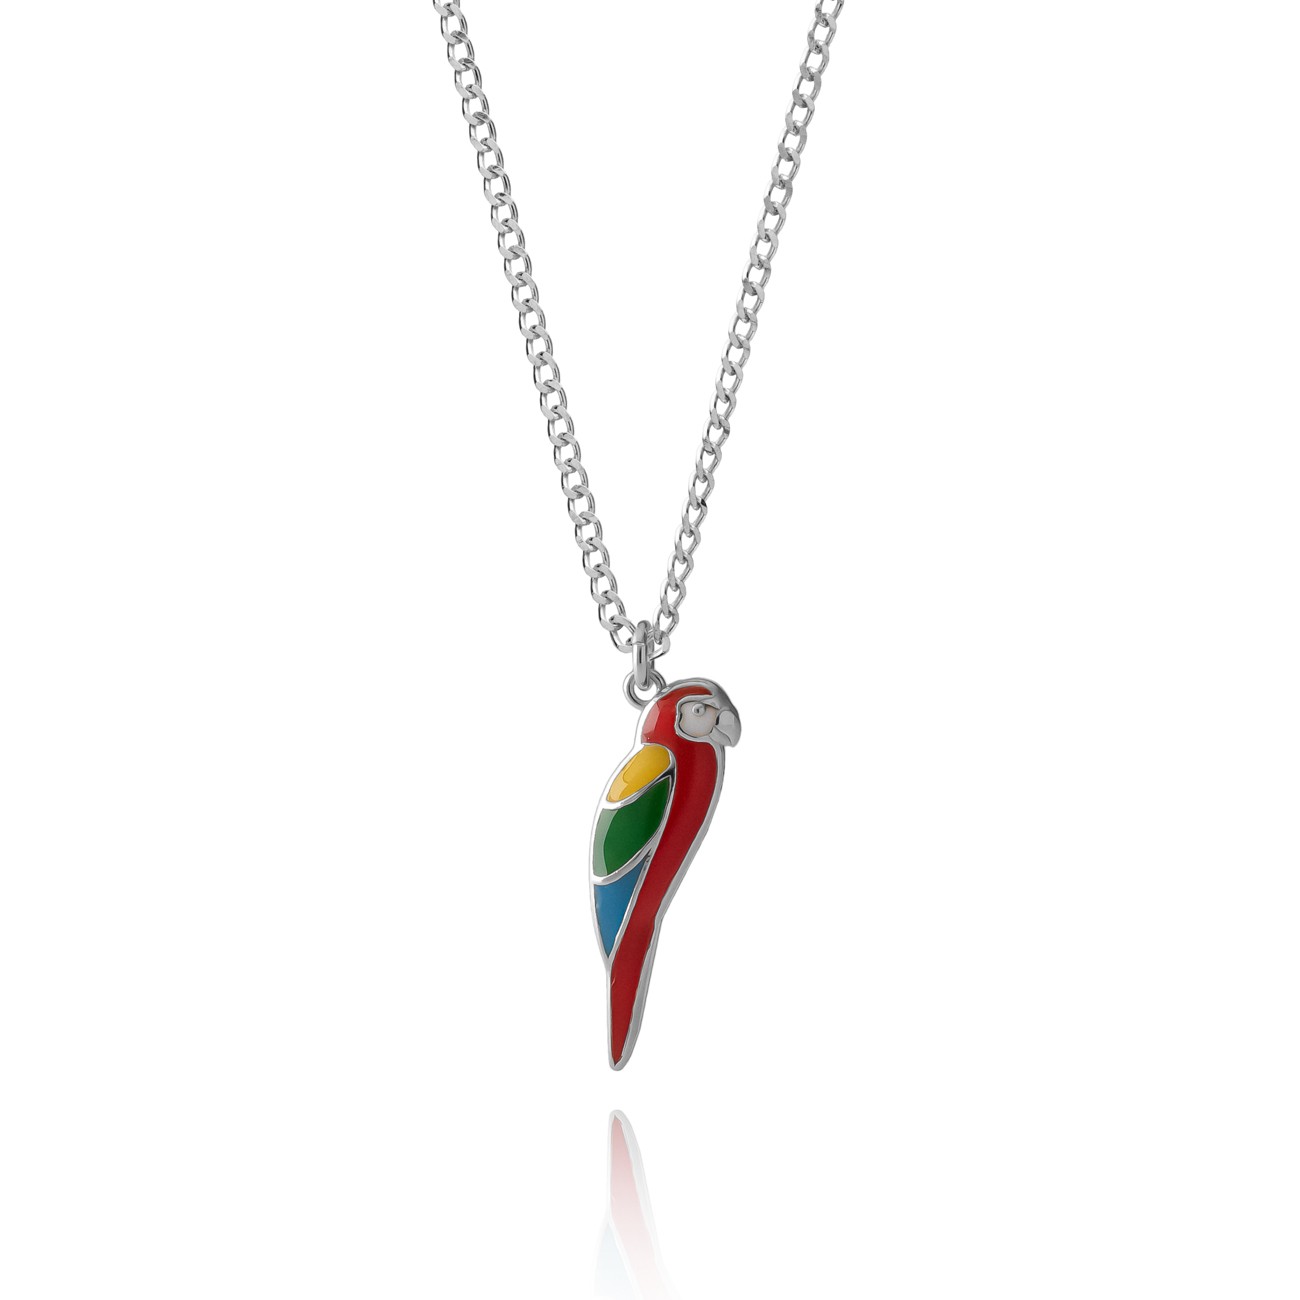 Parrot necklace, sterling silver 925